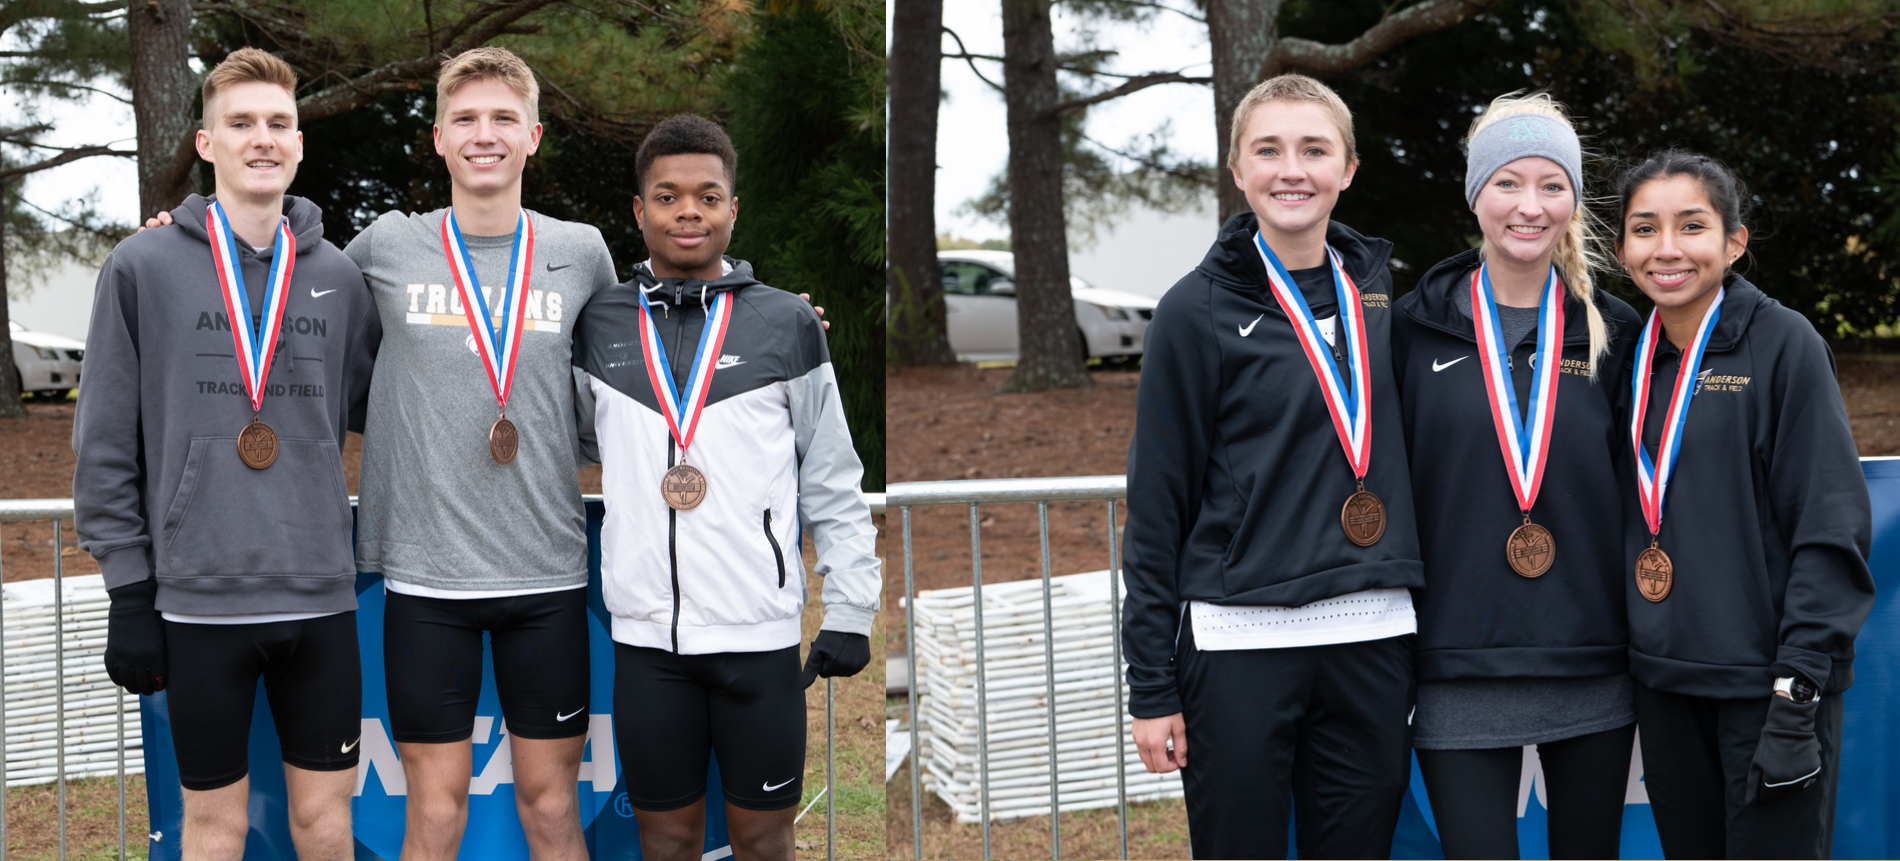 Six Cross Country Runners Named to USTFCCCA All-Region